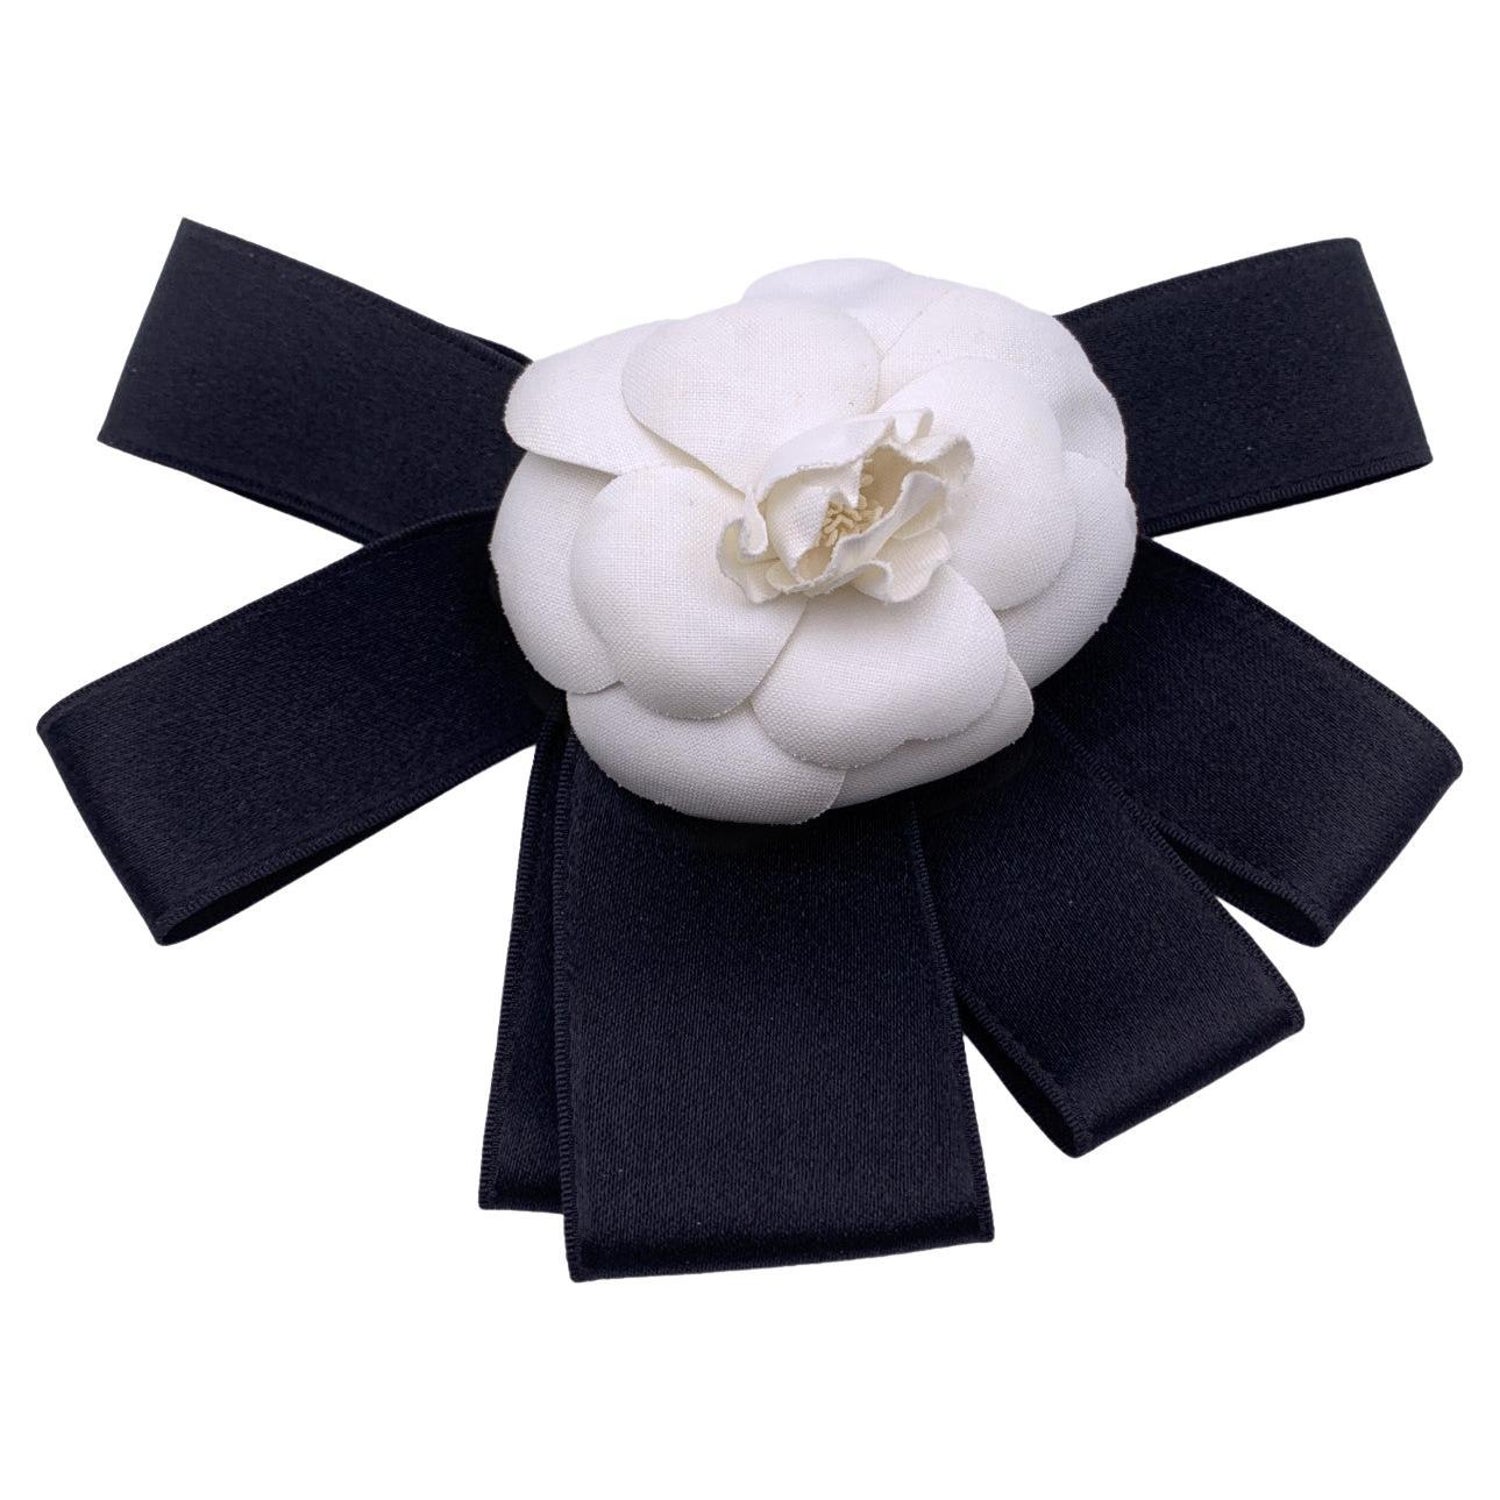 Chanel Authentic Camellia Flower Bow Hair Clip